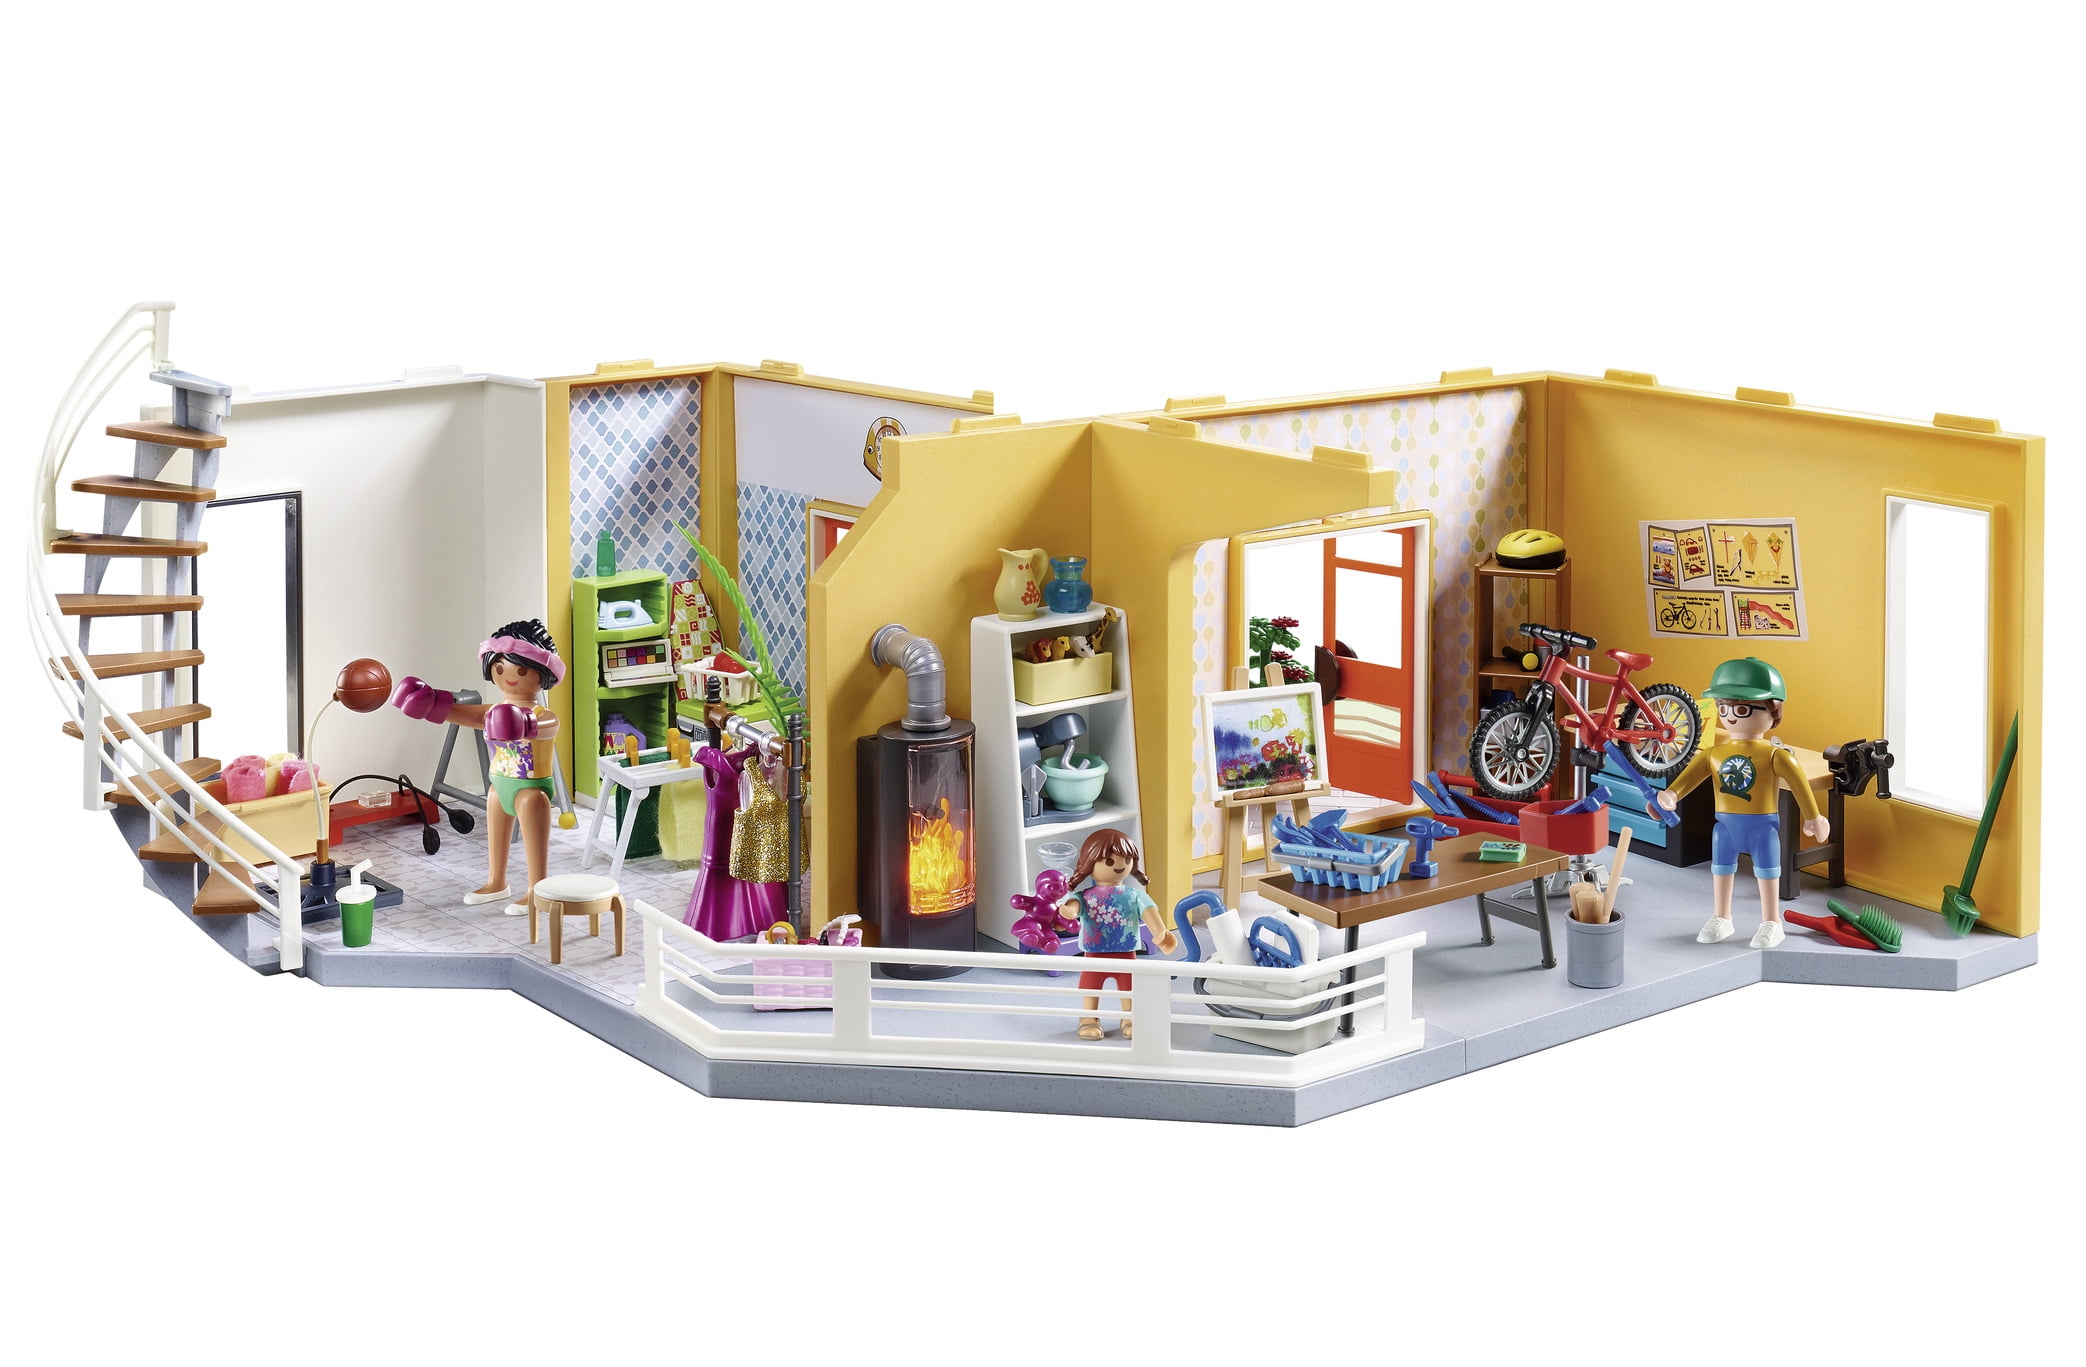 Playmobil City Life 70986 Modern House Floor Extension, With Light Effects,  Toy for Children Ages 4+